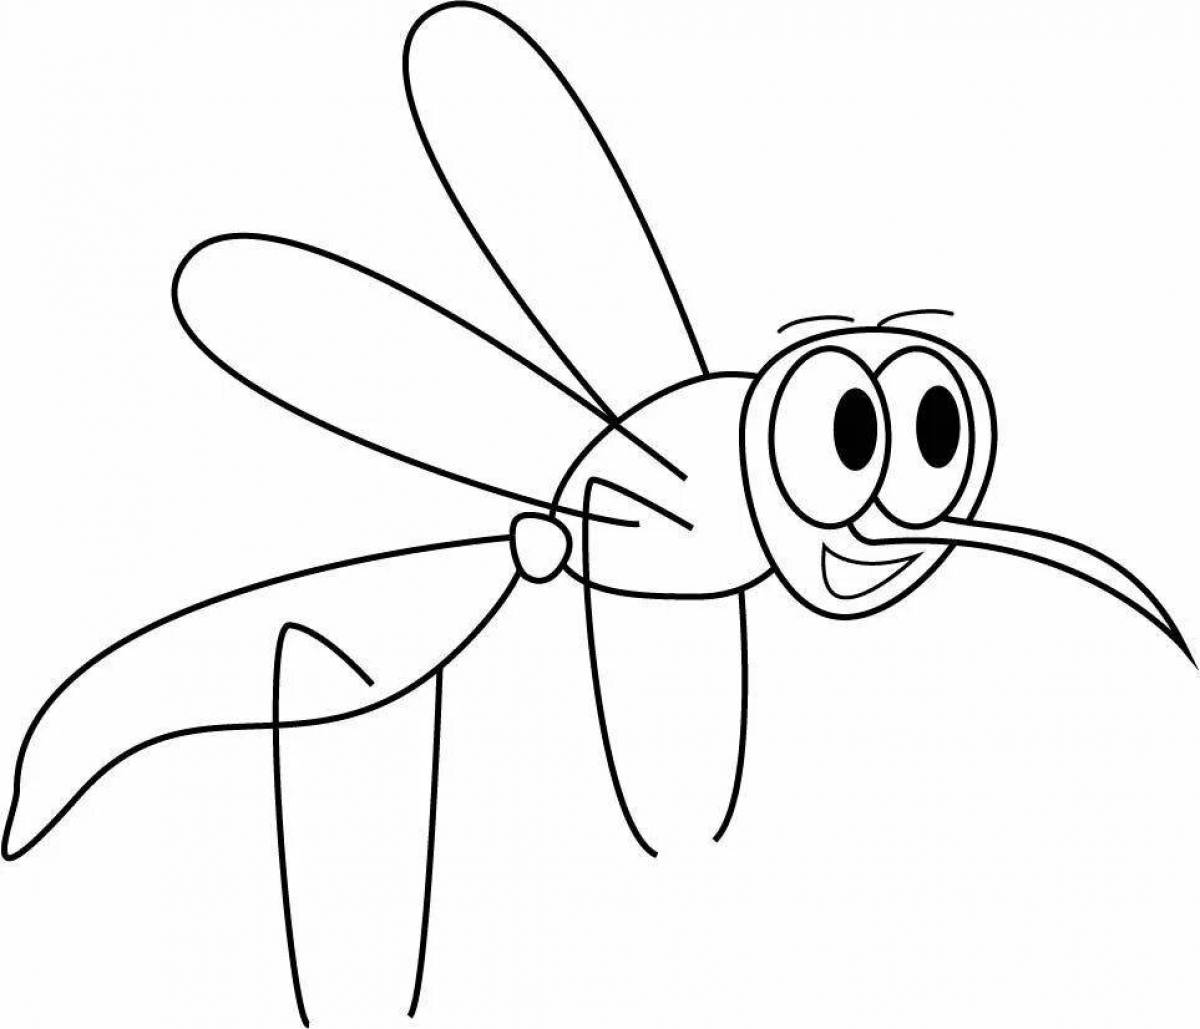 Amazing mosquito coloring page for kids